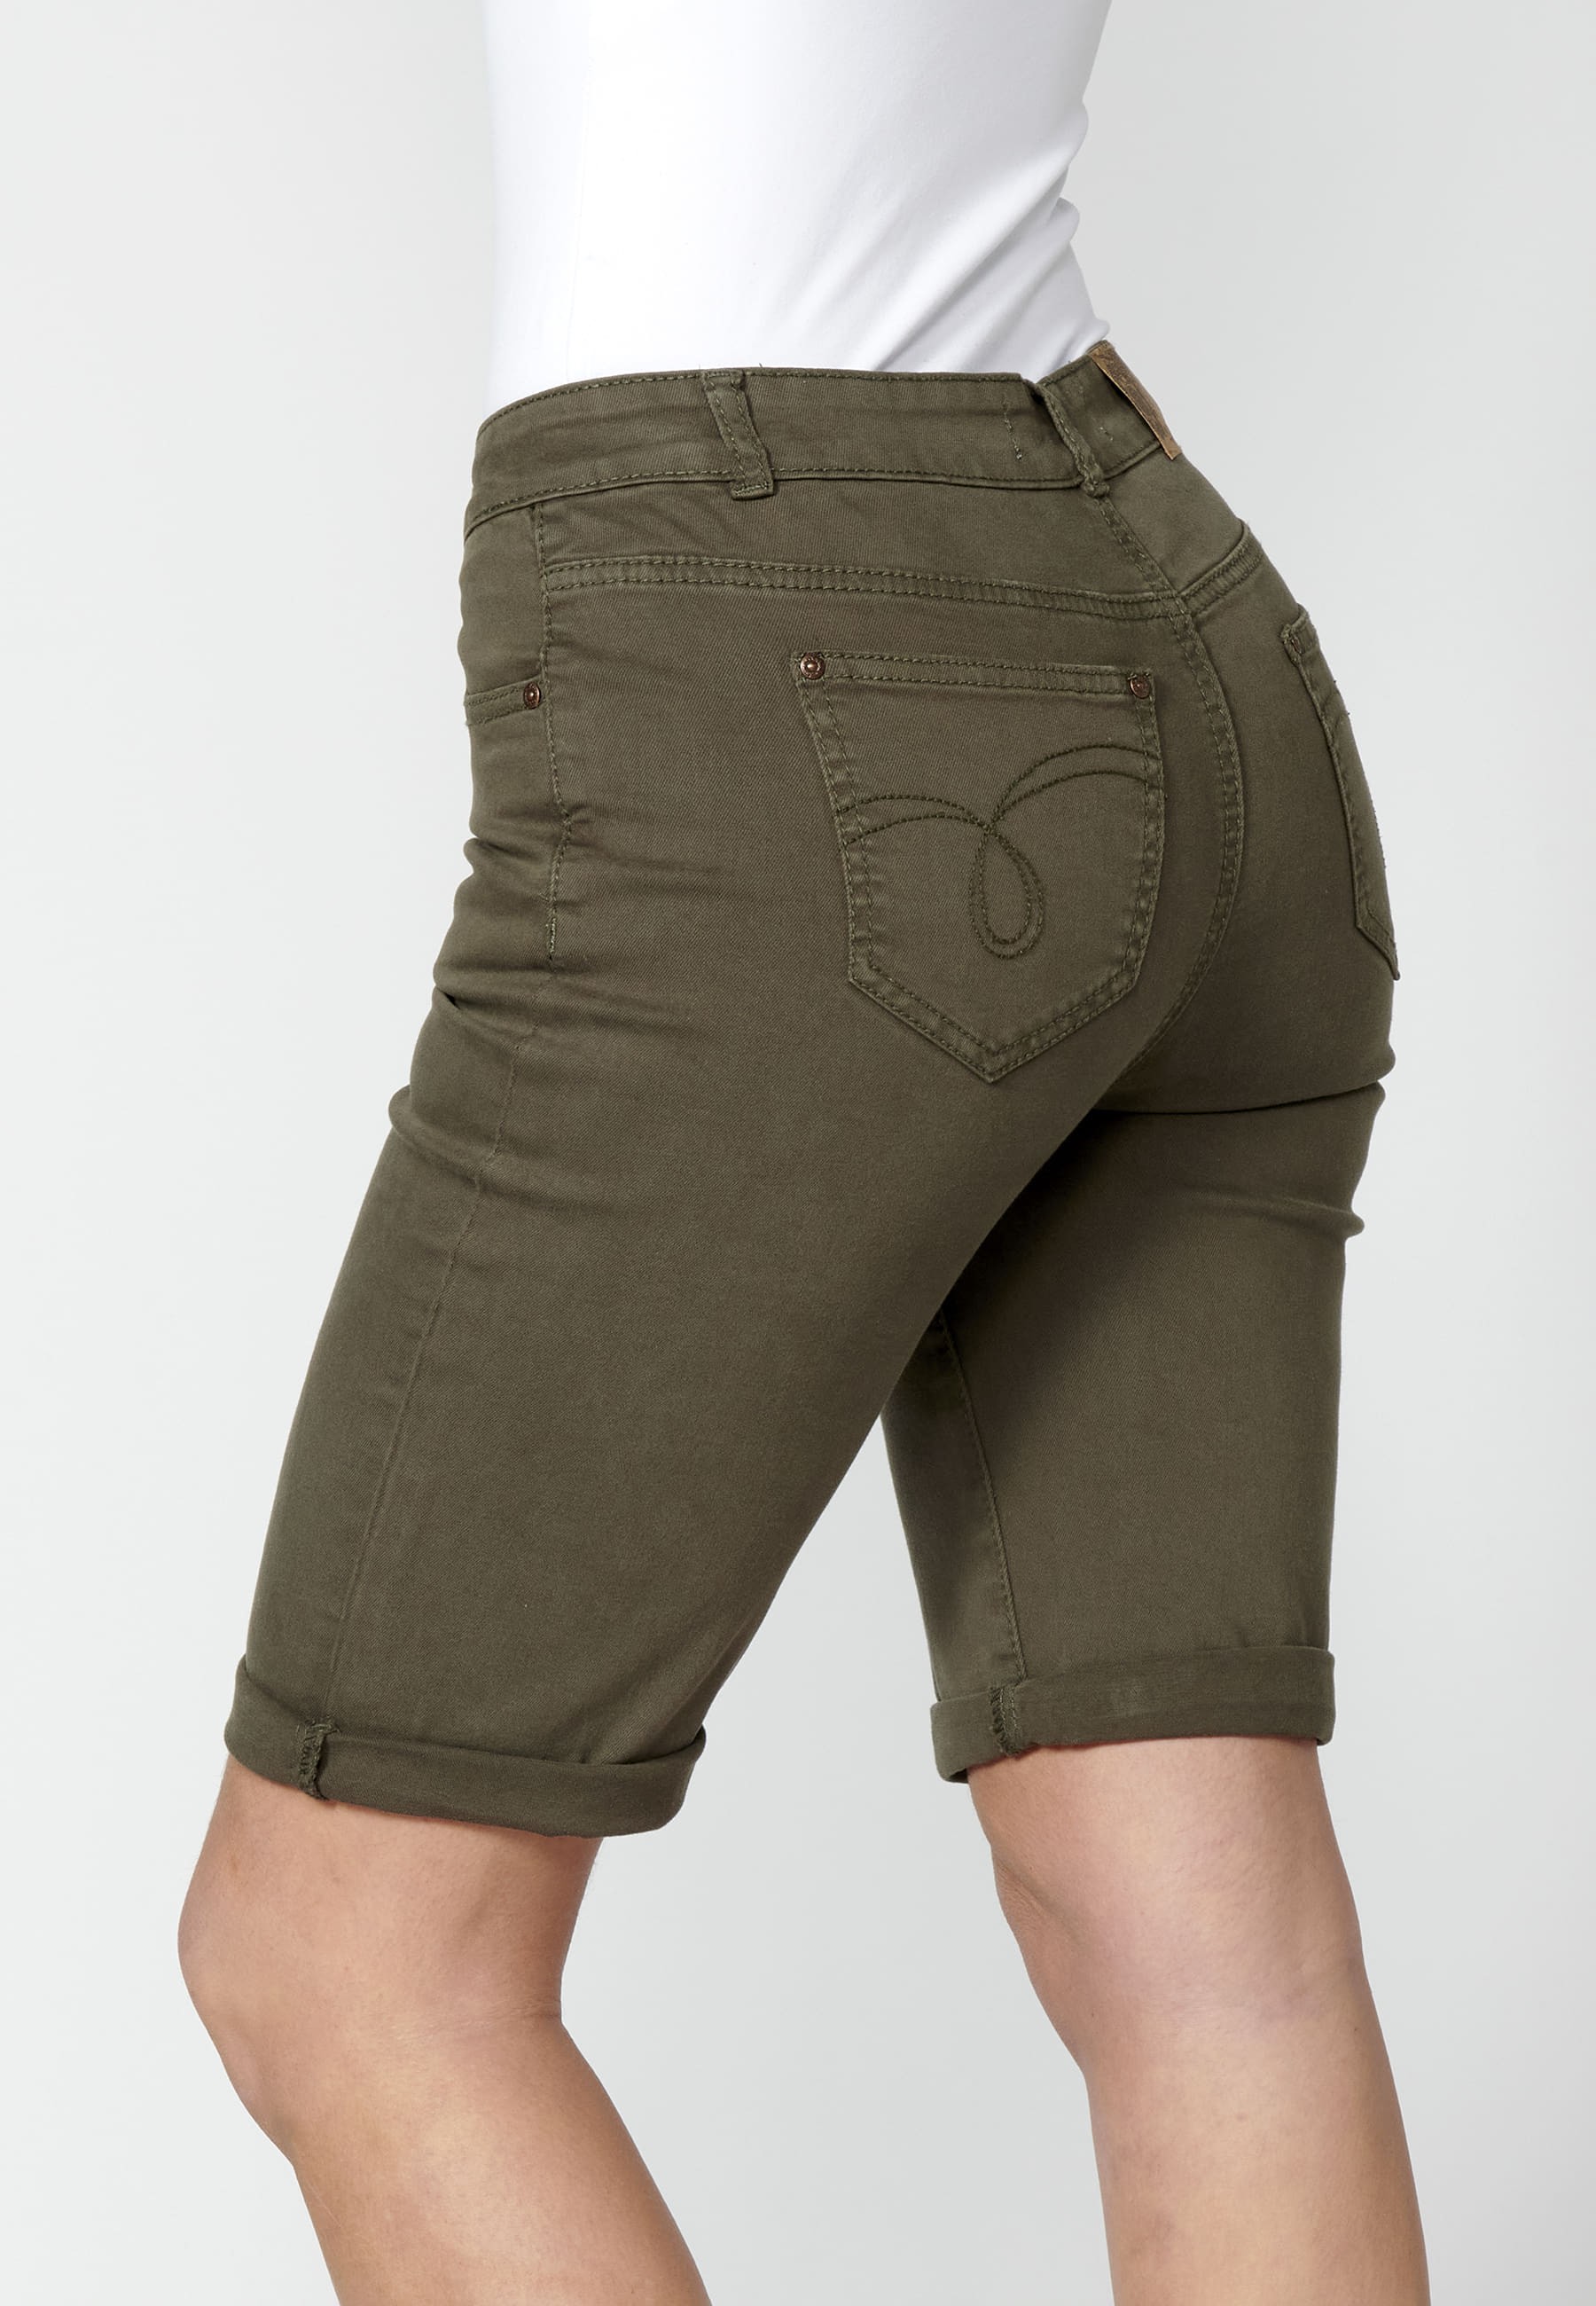 Khaki floral embroidered shorts for Women